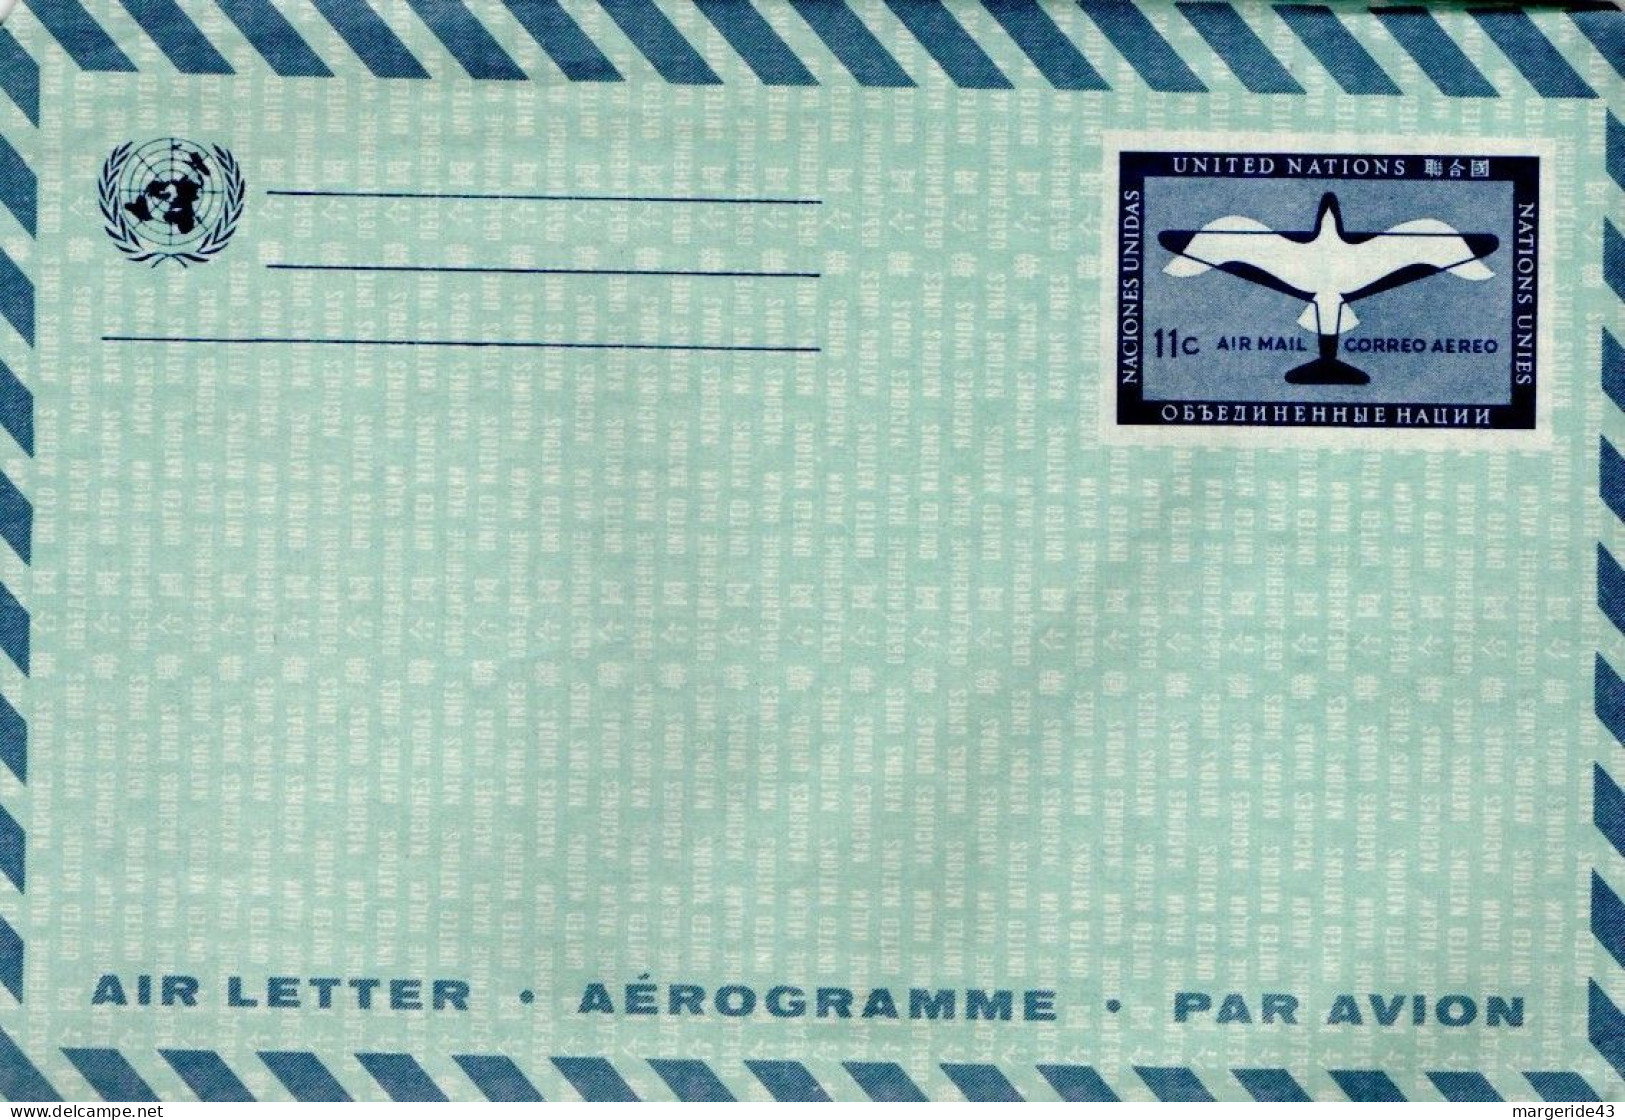 NATIONS UNIES AEROGRAMME 11 CENTS - Luftpost